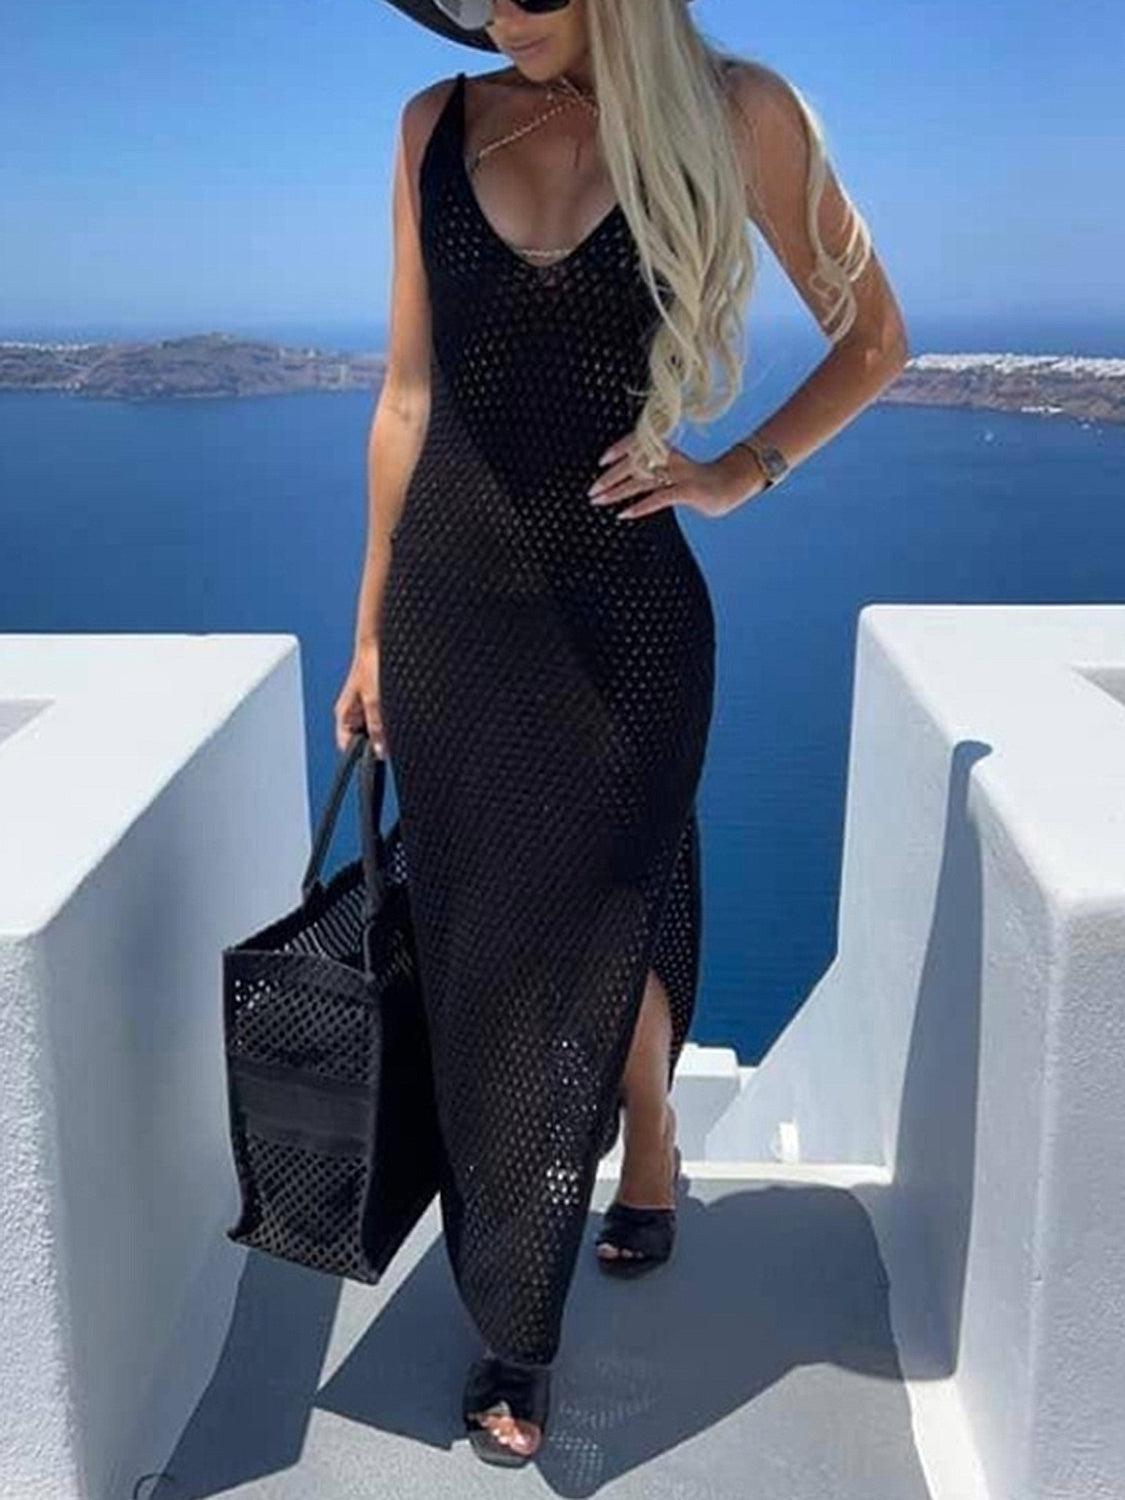 a woman in a black dress is standing on a ledge